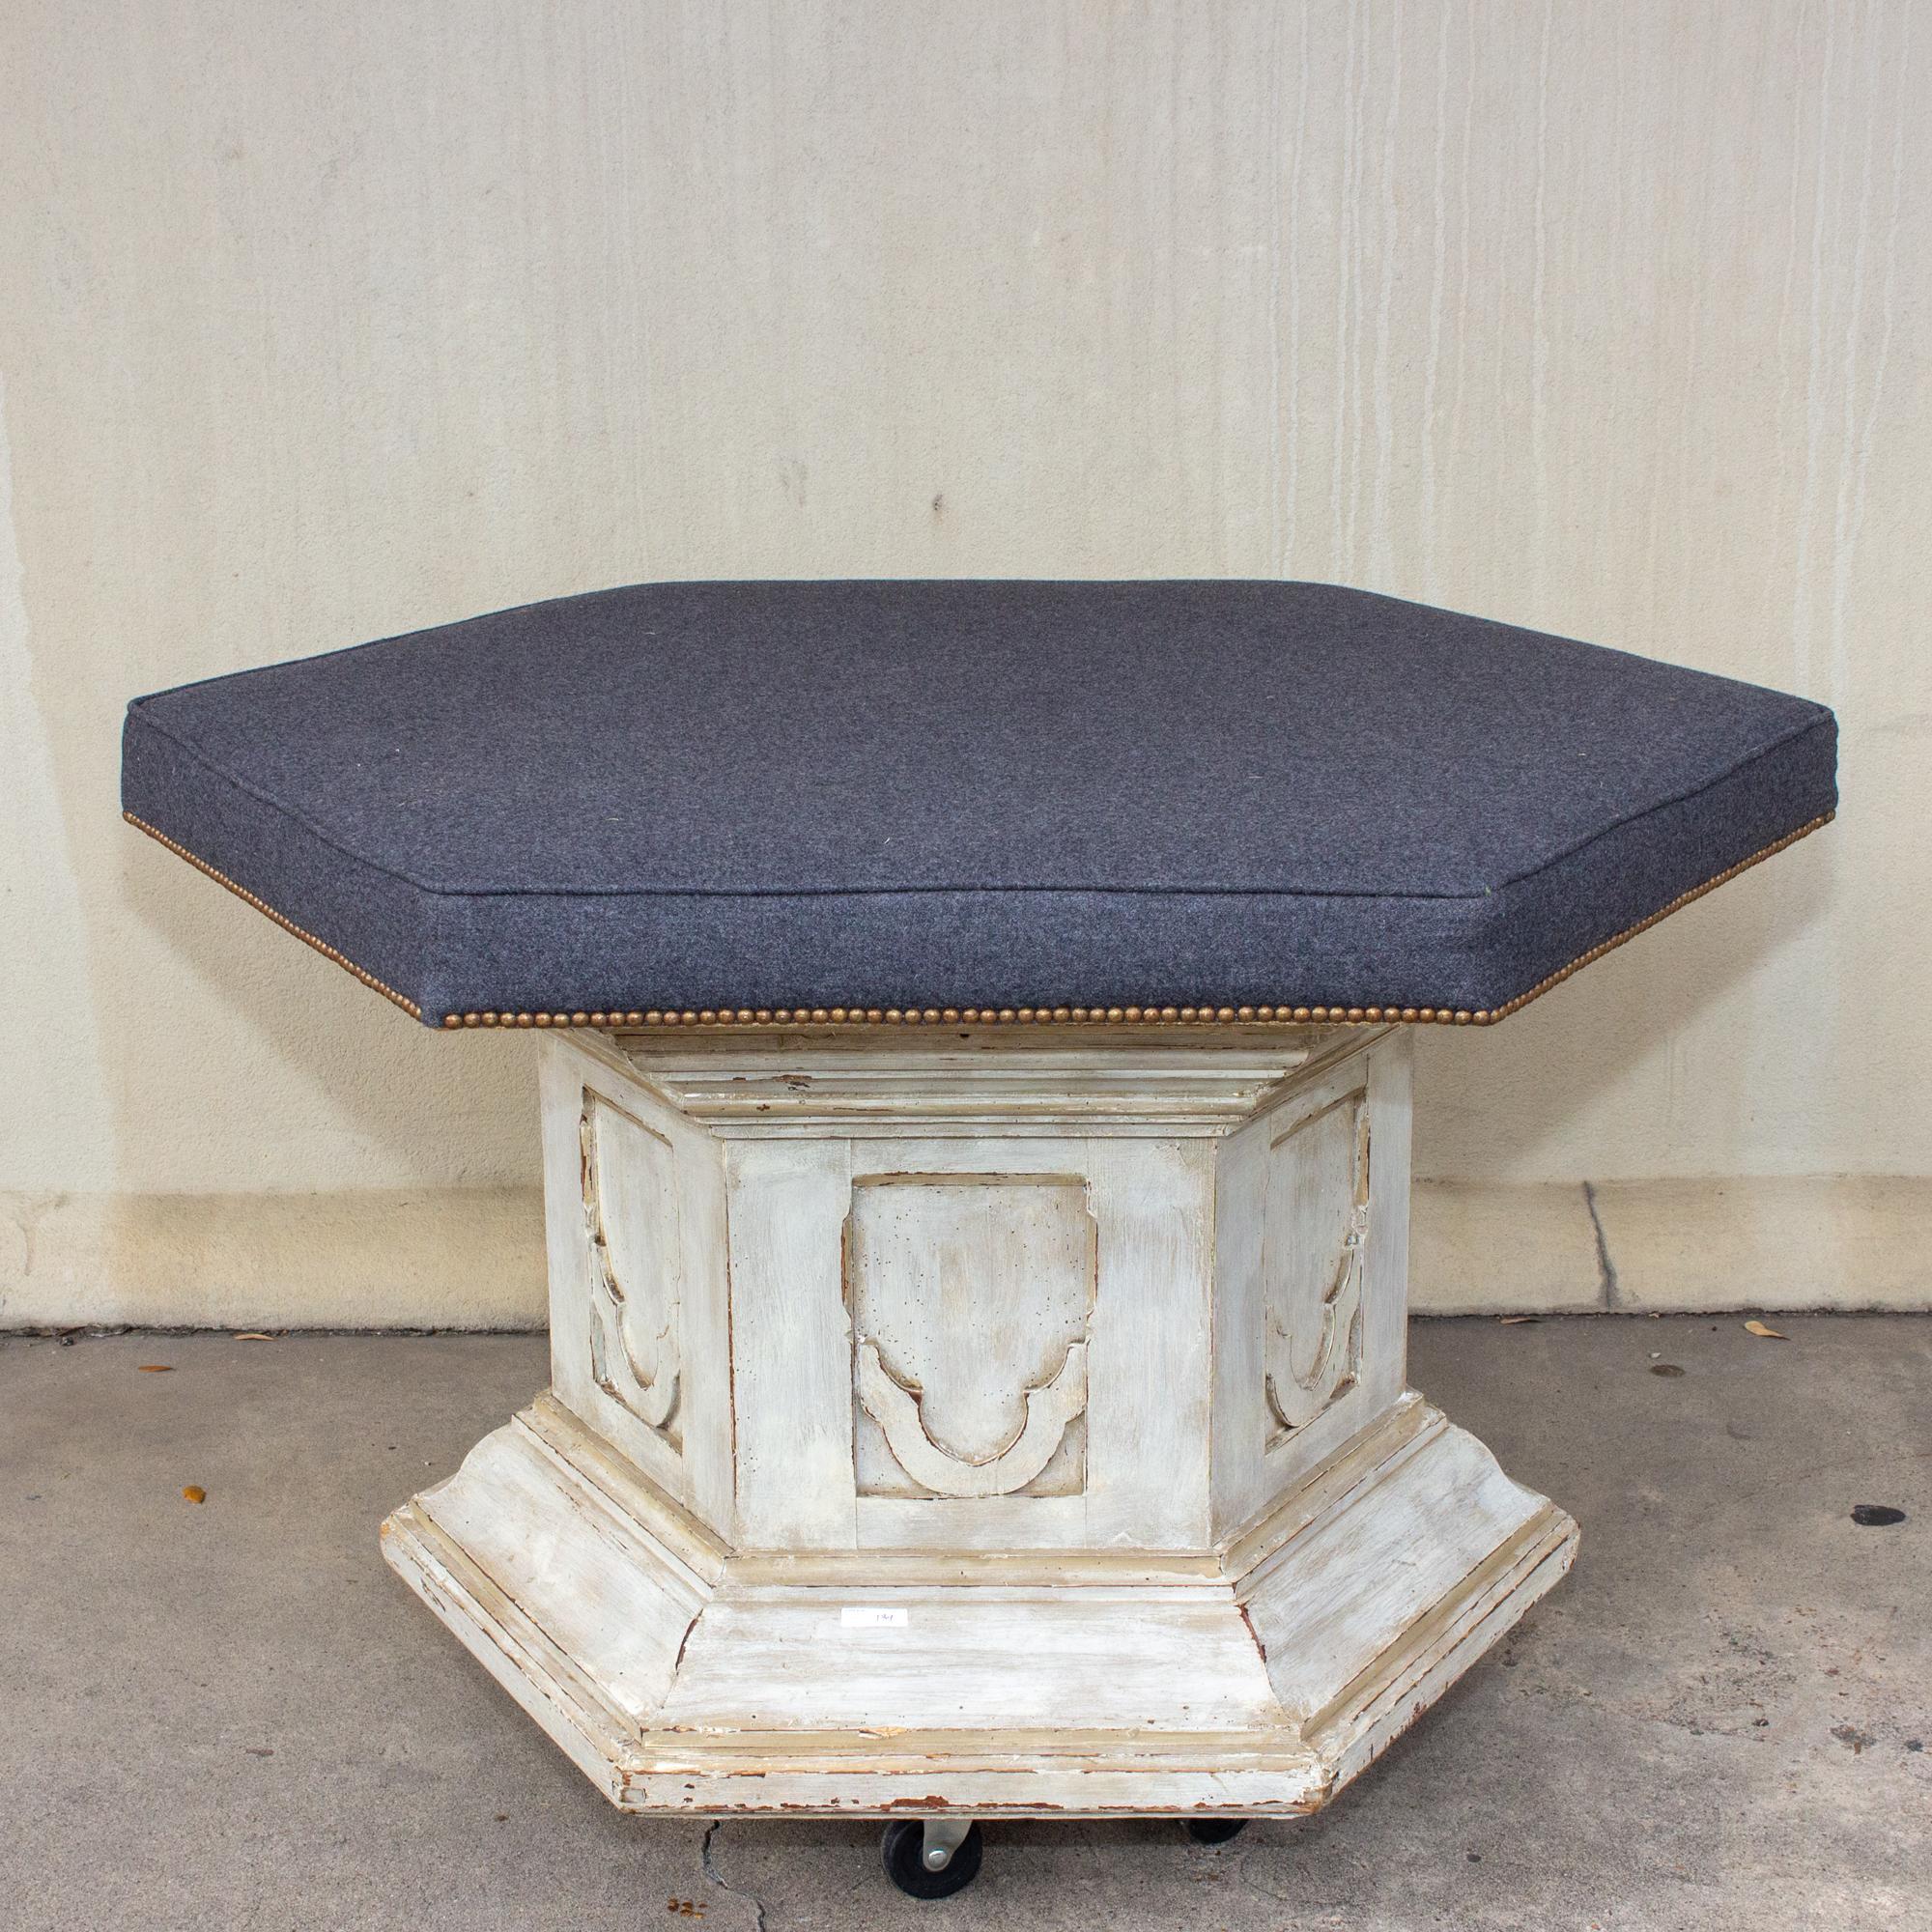 Early 20th Century Antique French Ecclesial Hexagonal-Shaped Ottoman with Gray Wool Upholstery For Sale